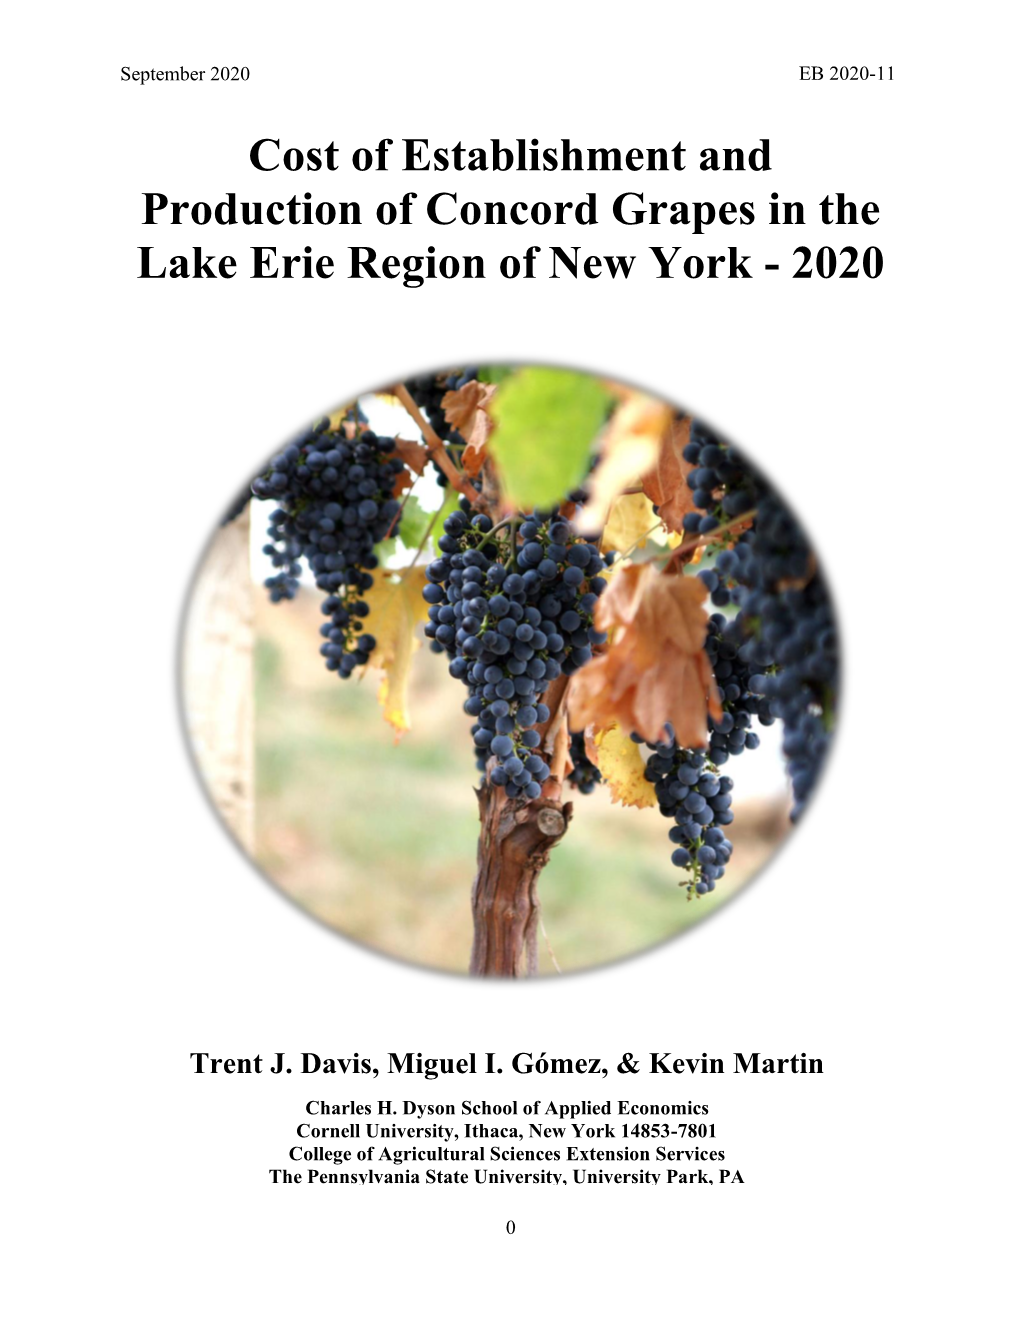 Cost of Establishment and Production of Concord Grapes in the Lake Erie Region of New York - 2020